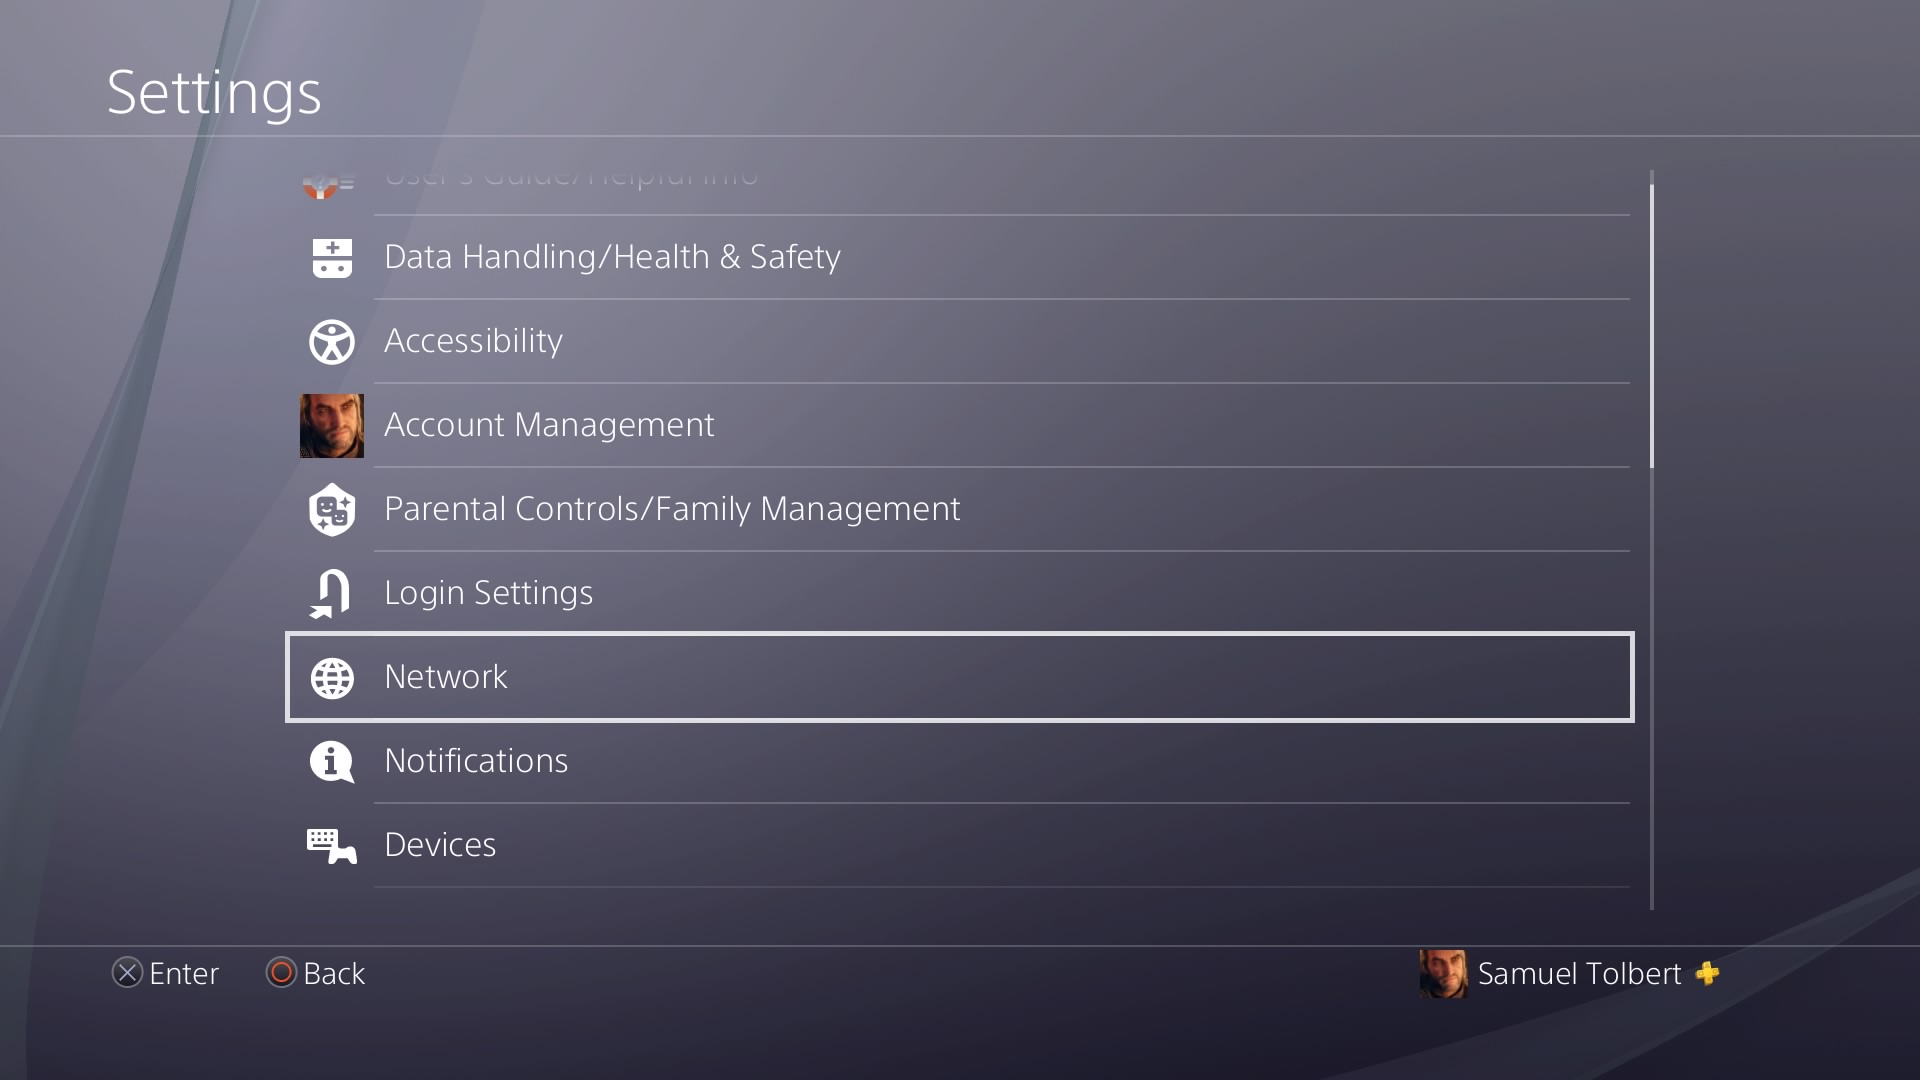 Check internet speed on PS4: PS4 network settings